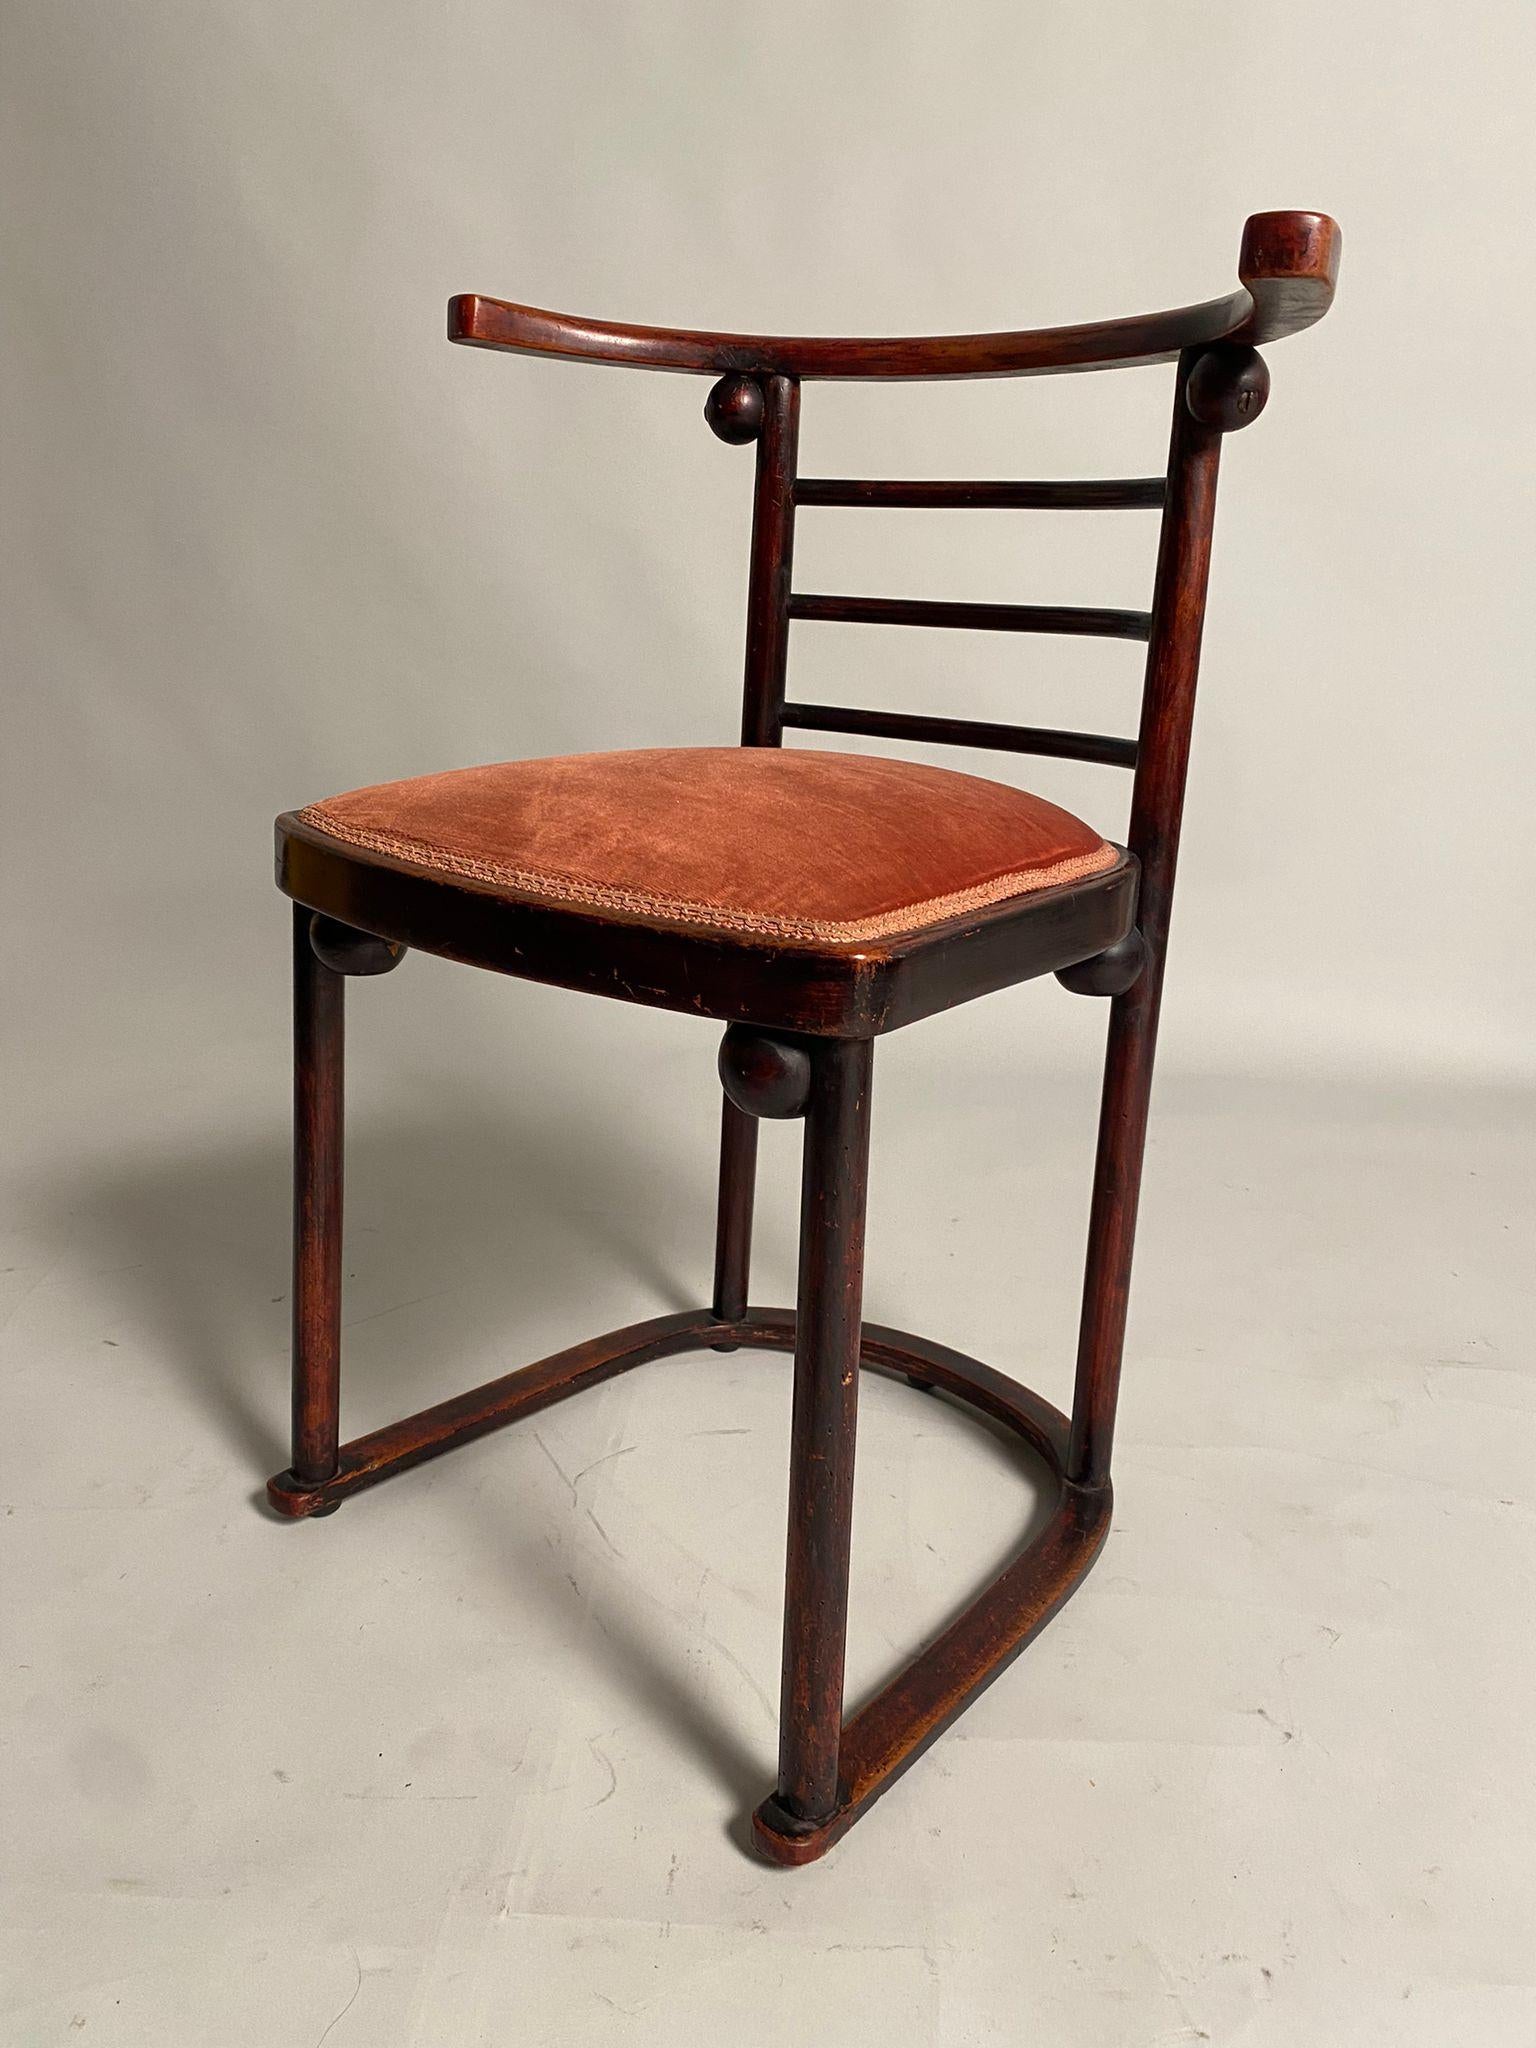 Rare chair in bent beech designed by the illustrious Viennese architect Joseph Hoffmann for the Cabaret Fledermaus in Vienna in 1907. Produced by the Kohn company, the chairs represent one of the most famous beginnings in the history of design.